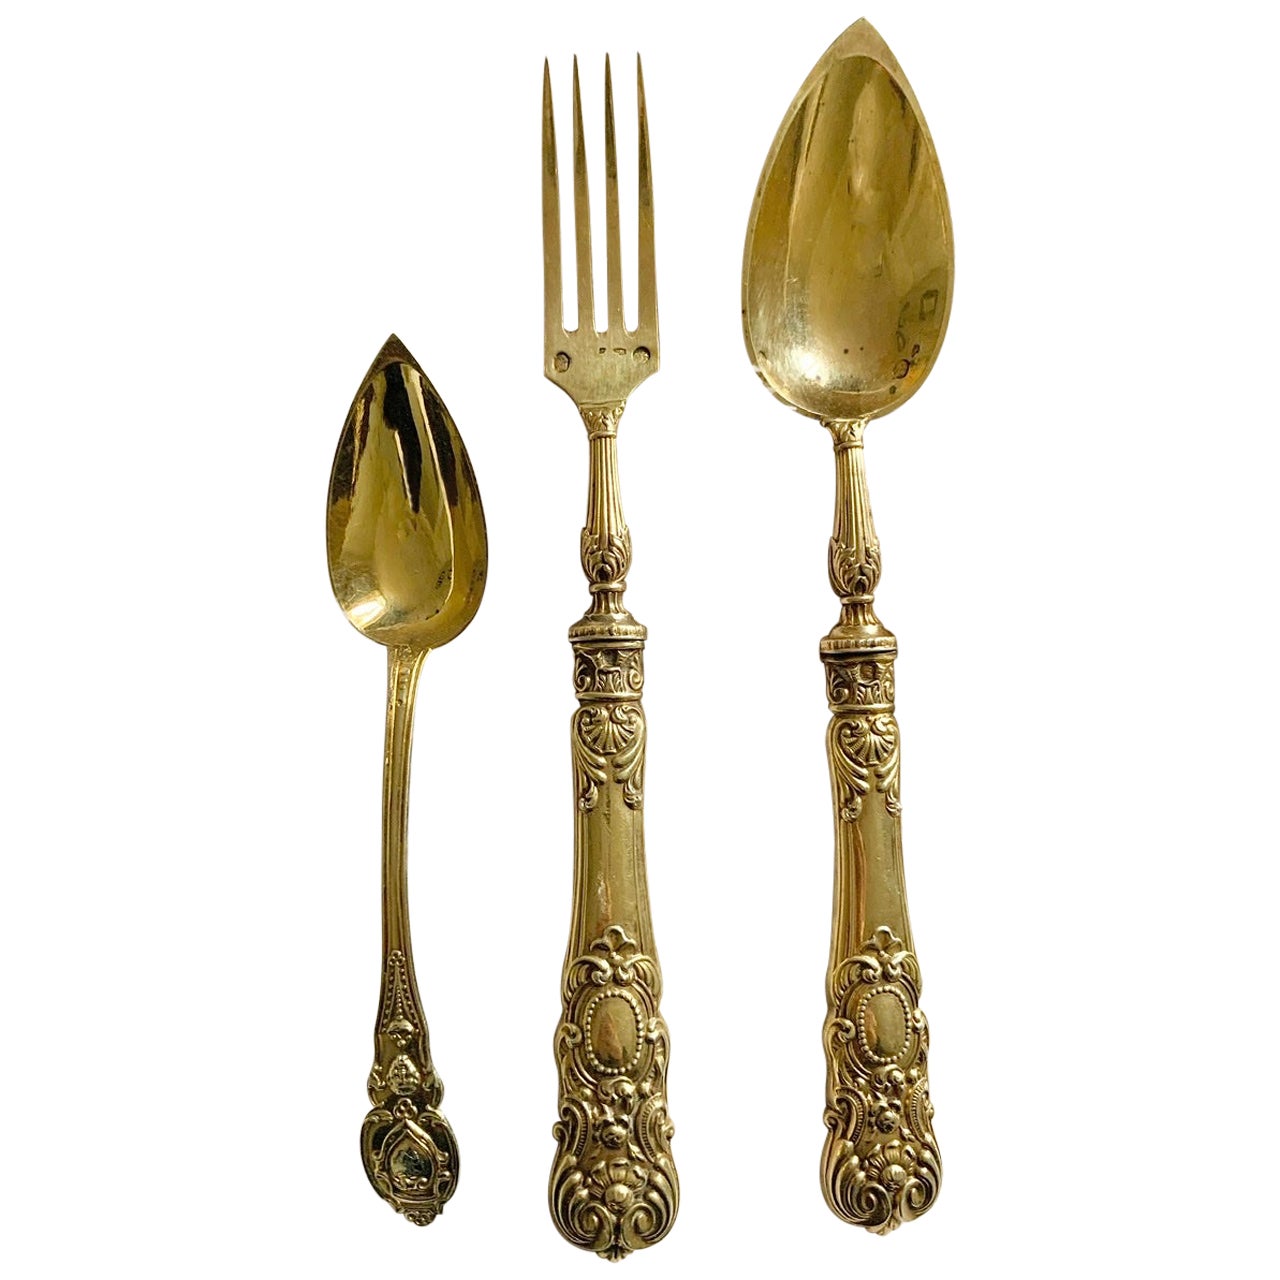 Gilded Cutlery Set in Vermeil Louis XIV Style Napoleon III Era 19th Century For Sale